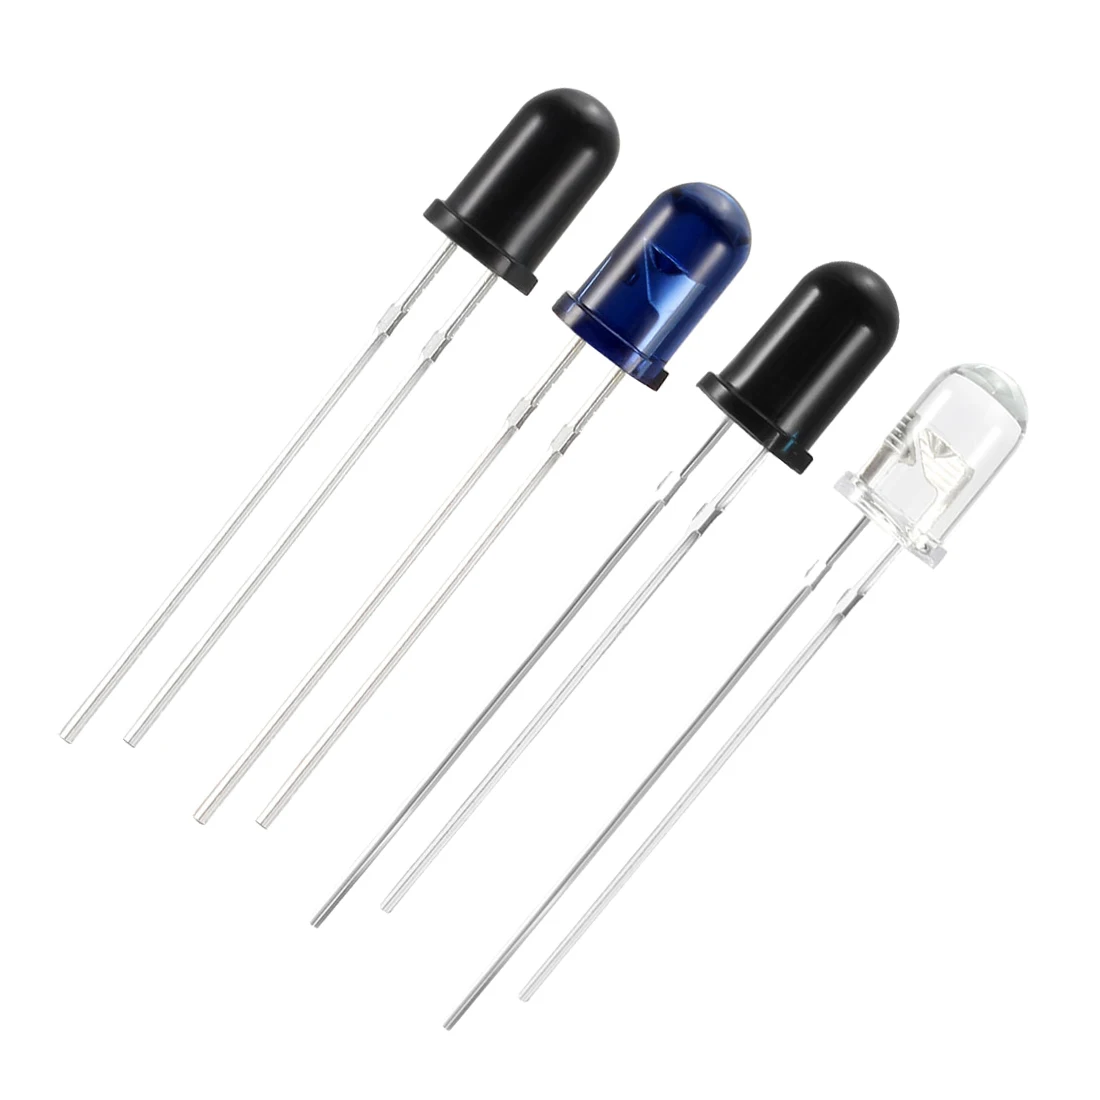 Details about  / Gikfun 5mm 940nm LEDs Infrared Emitter and IR Receiver Diode for Arduino 20 pc